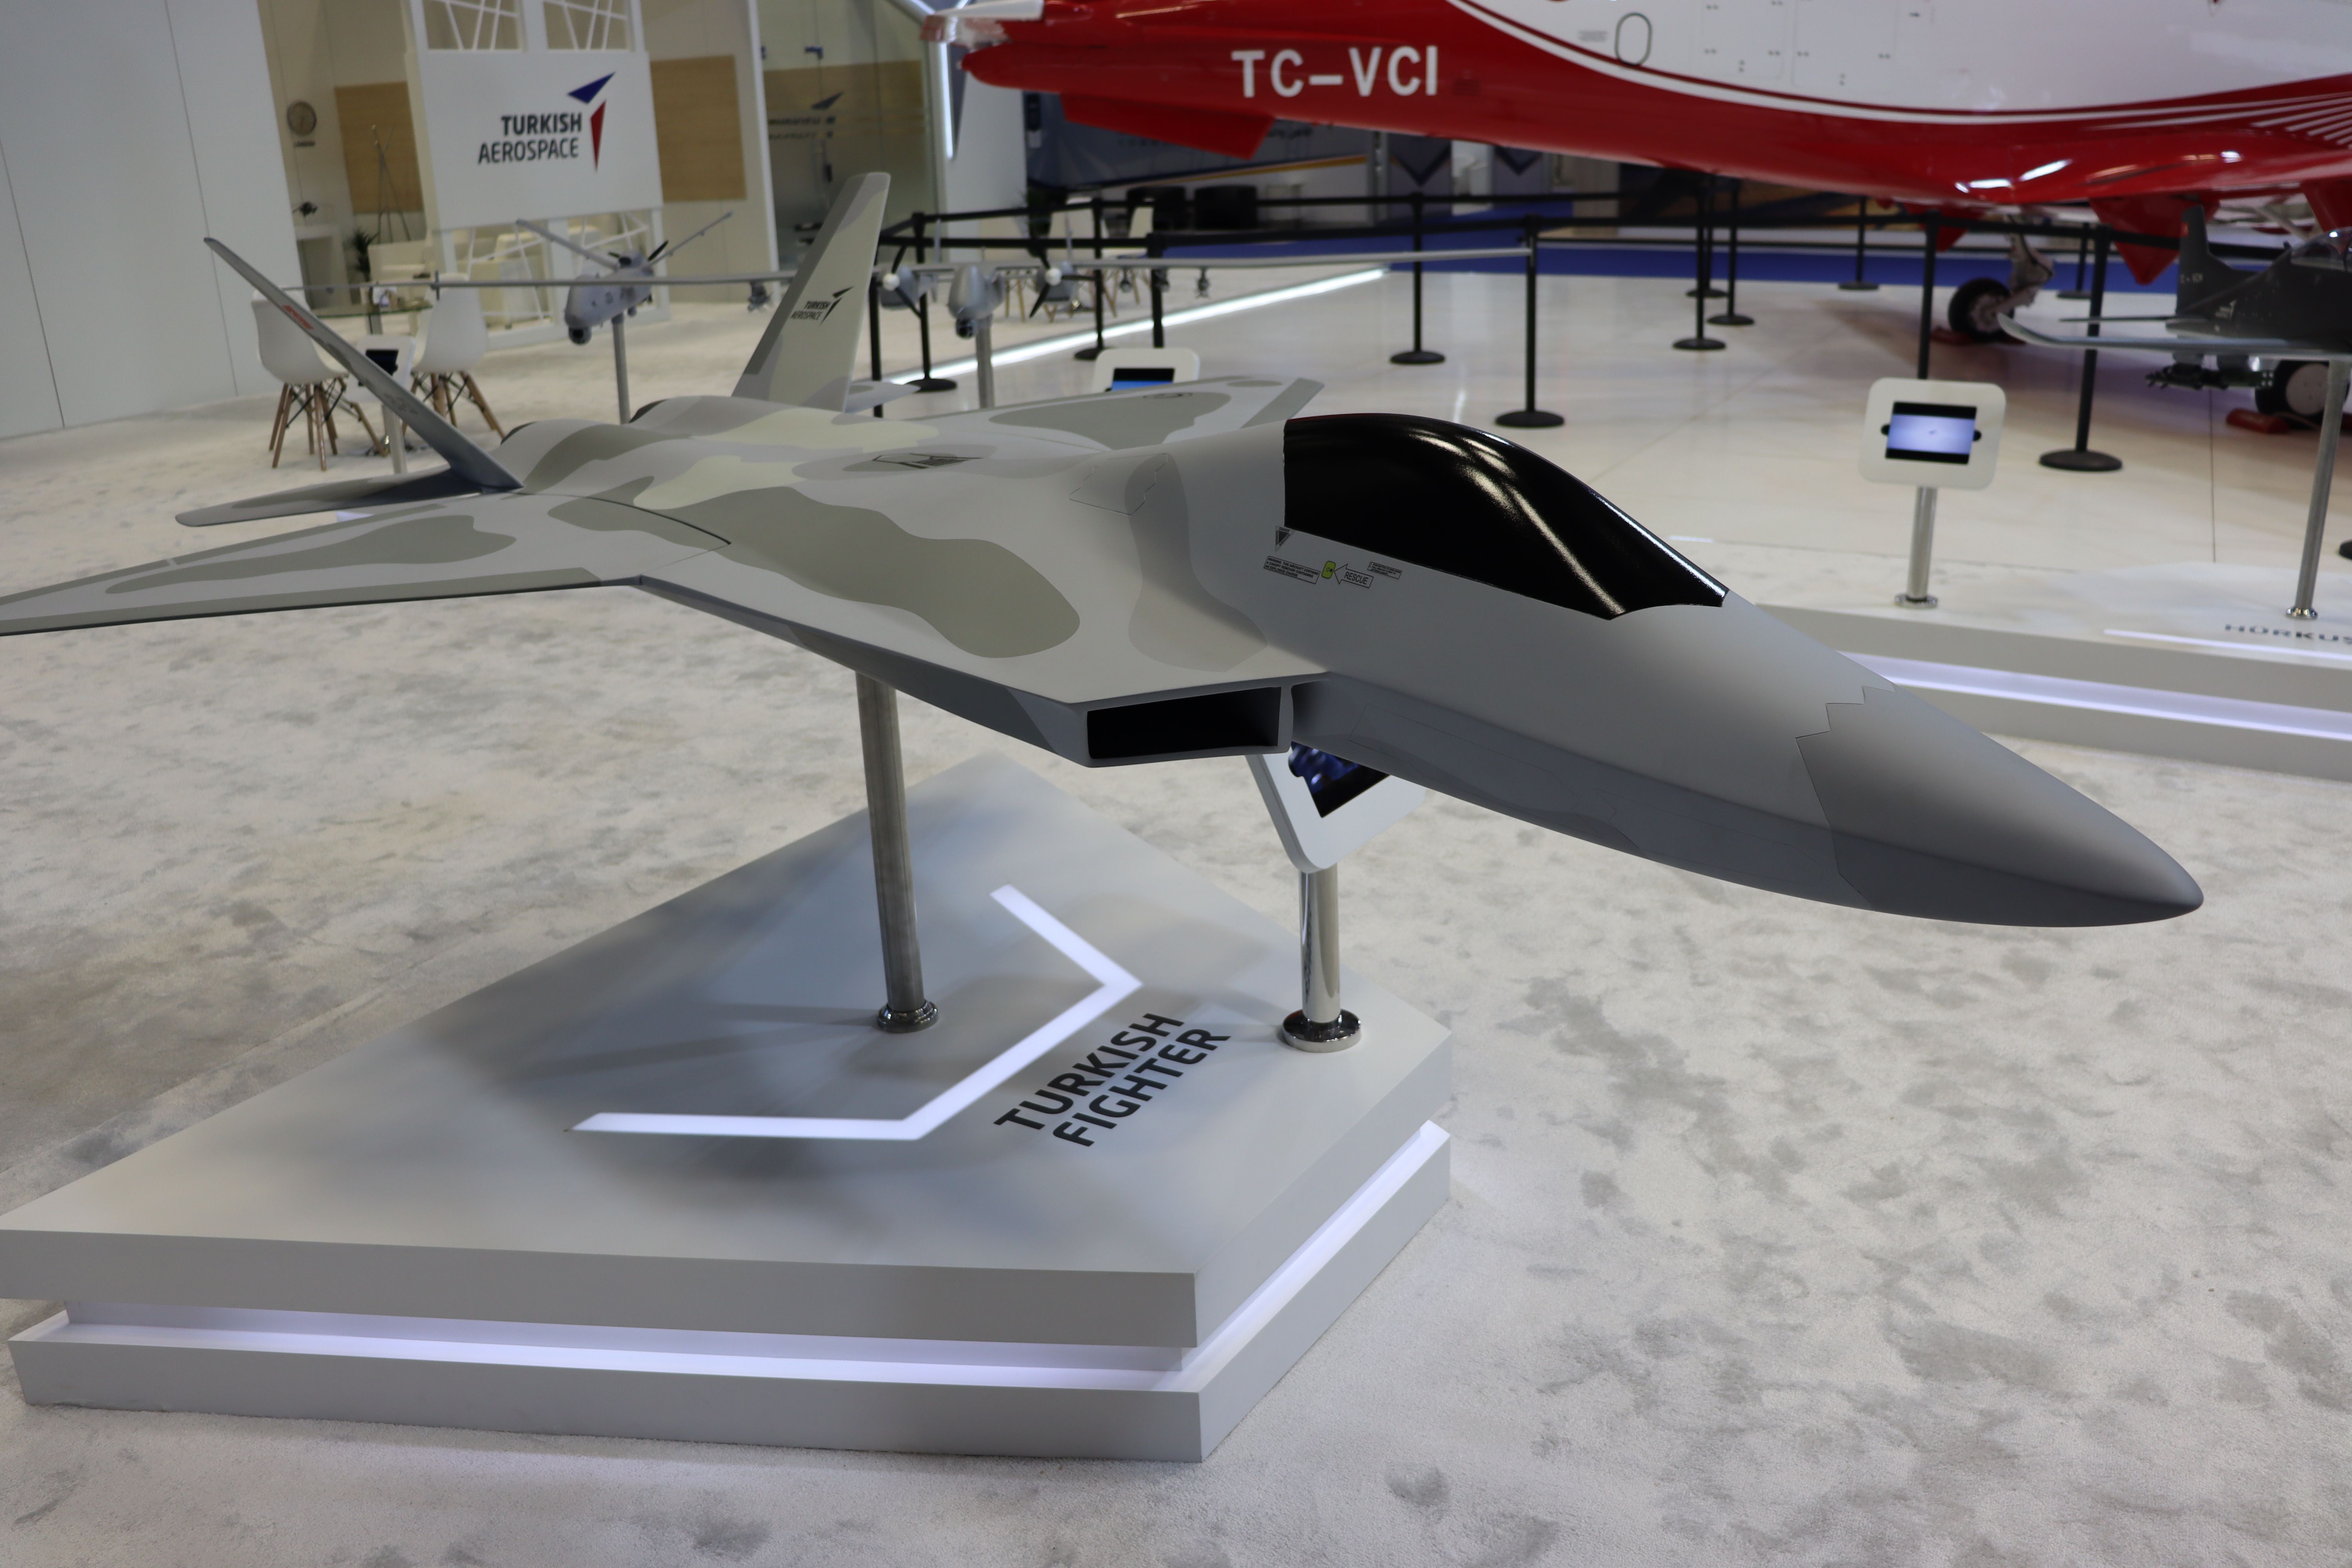 Demir: TRMotor, Rolls-Royce-Kale-Pratt, TEI have to work together for the TF-X engine